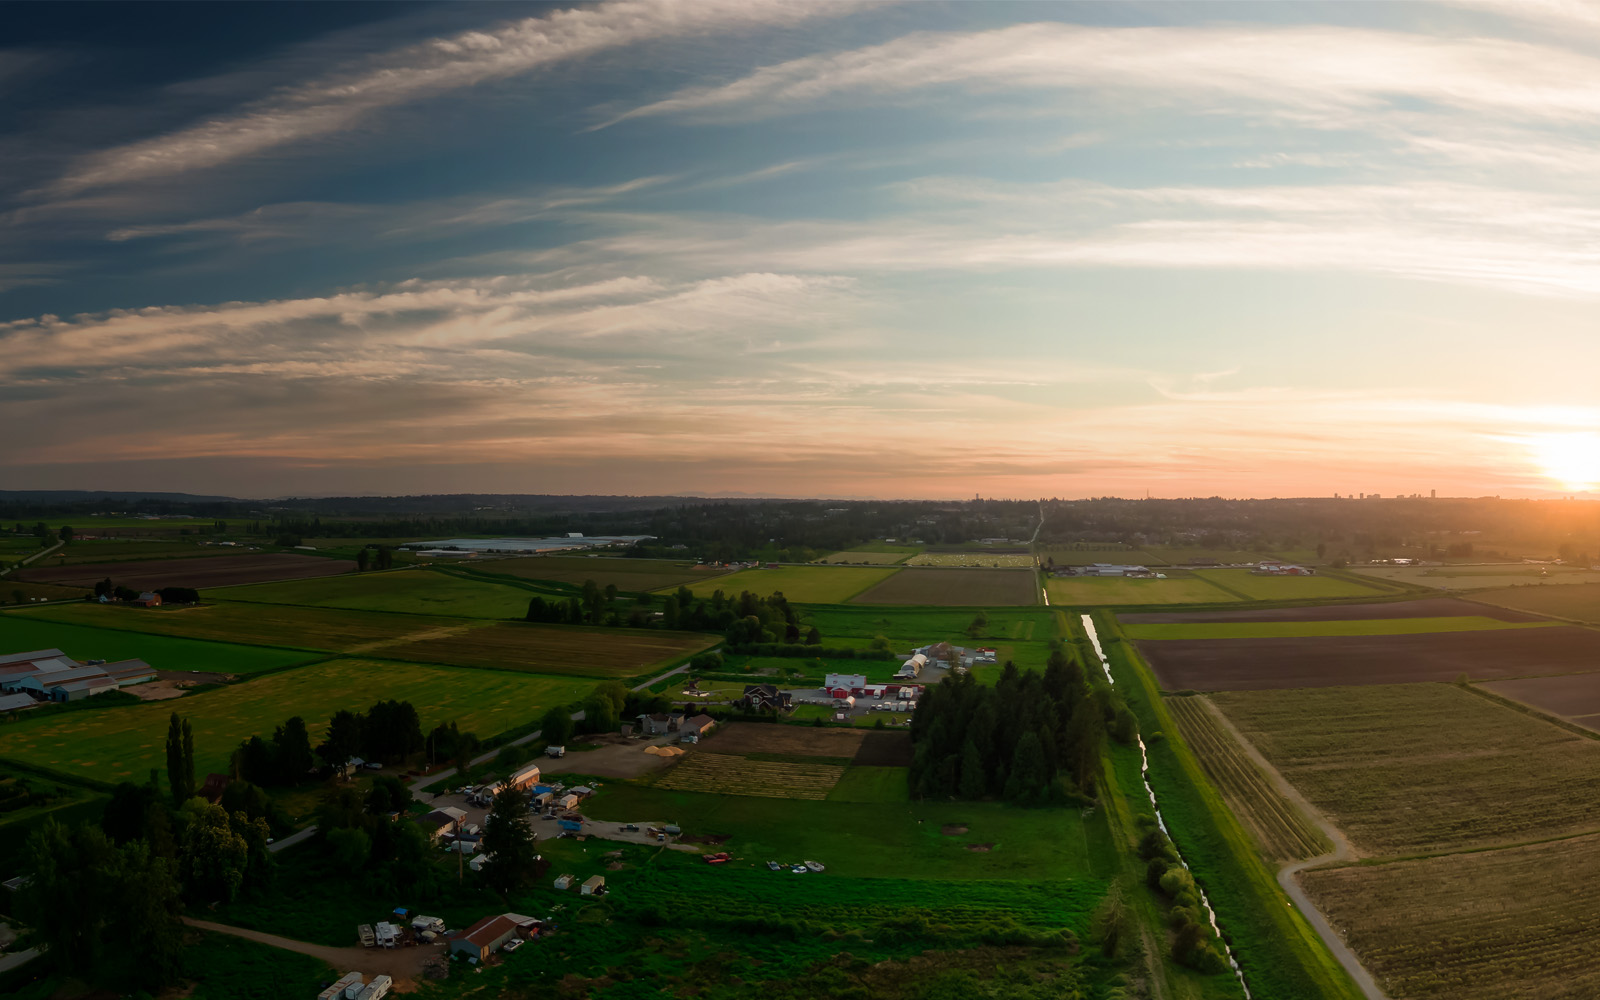 Birdseye view of a farm during sunset